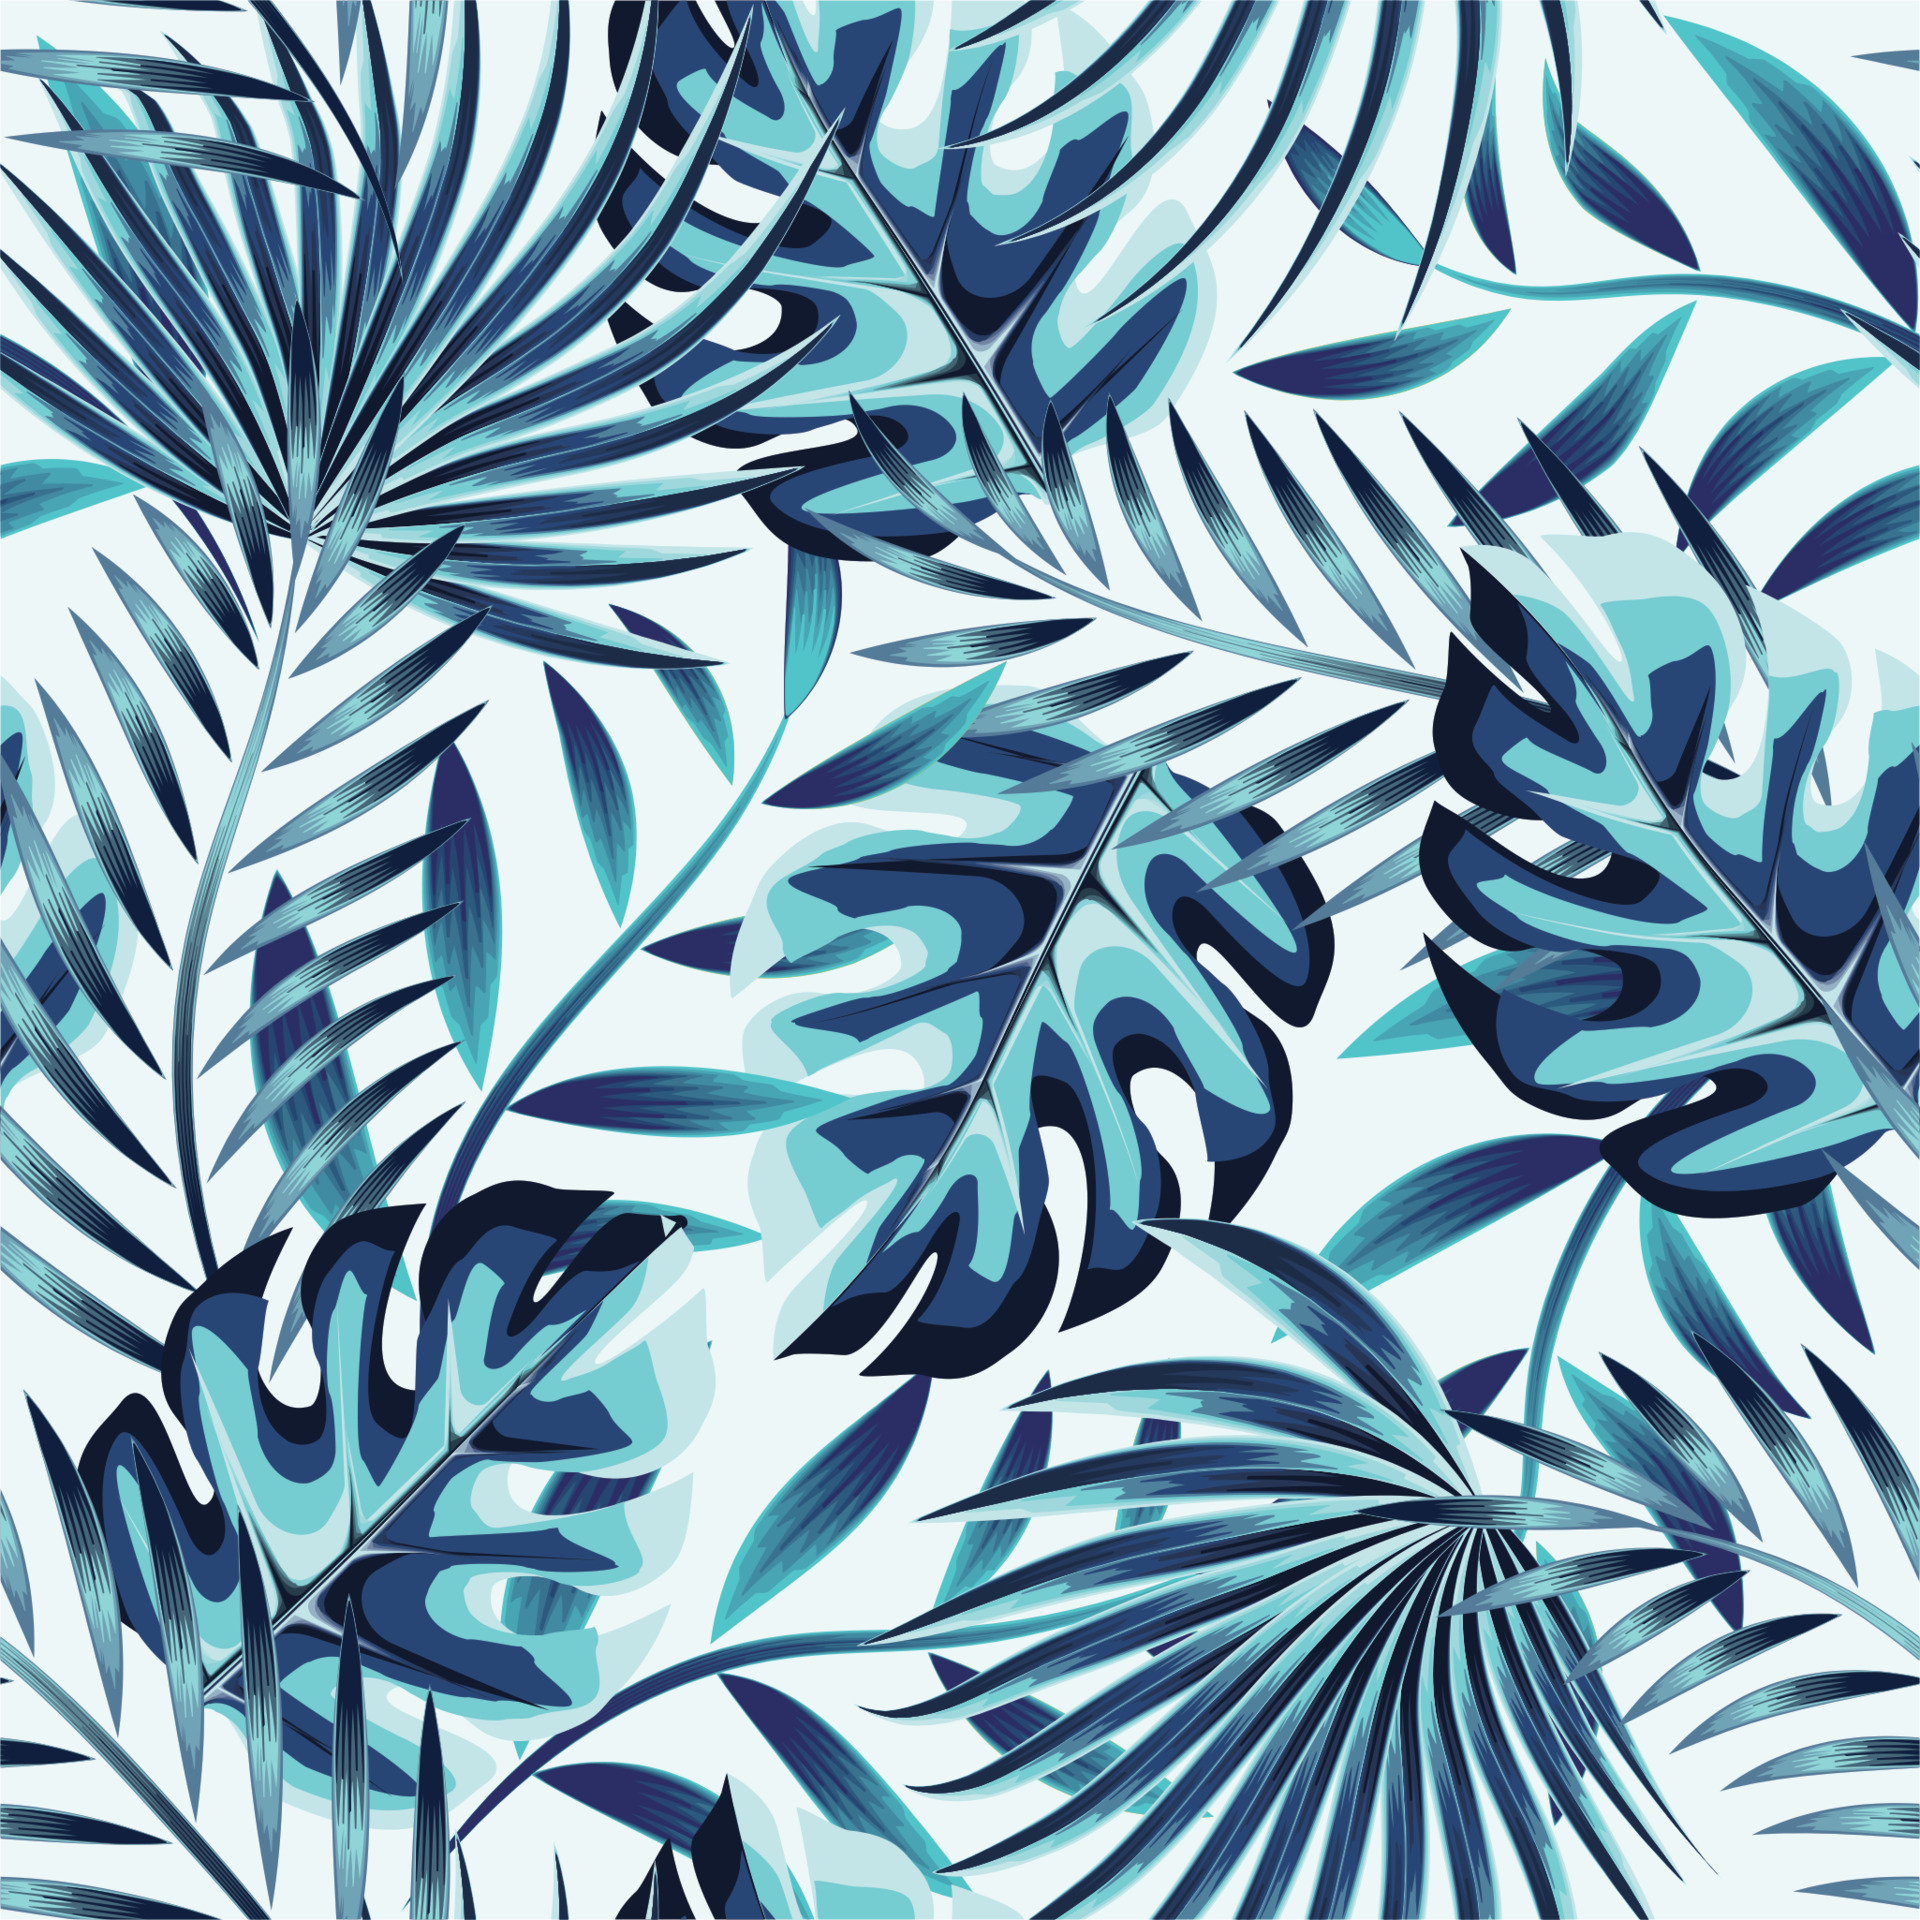 Tropical summer vacation clipart set and seamless patterns